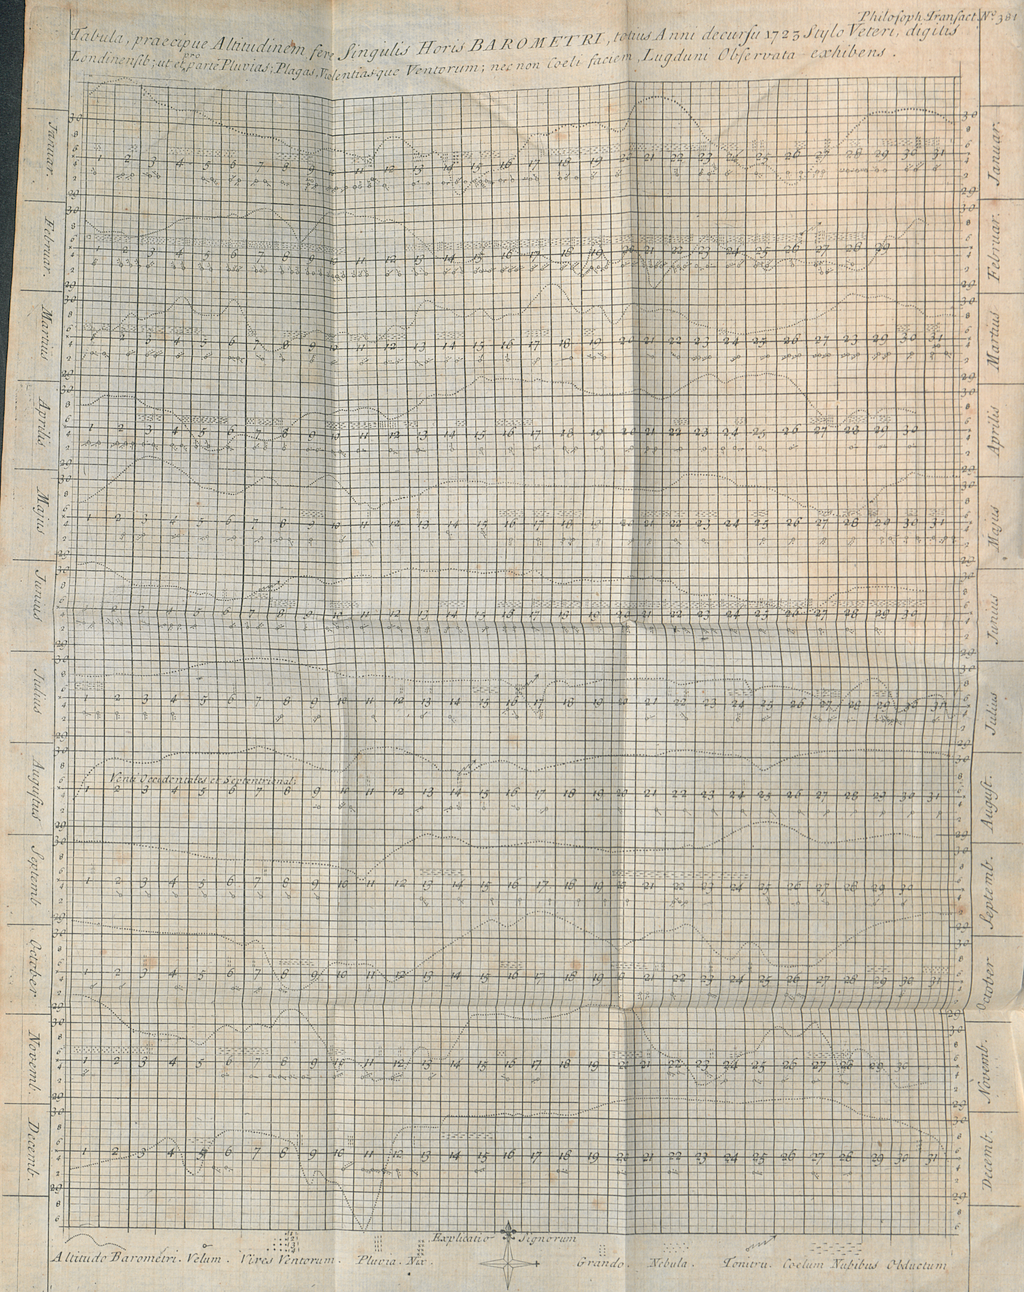 The image shows the chart attached to Nicolaus Cruquius’ weather observations from Leyden in 1723. It was published in the Royal Society’s journal Philosophical Transactions in 1724. The chart shows the daily barometric observations with dots.